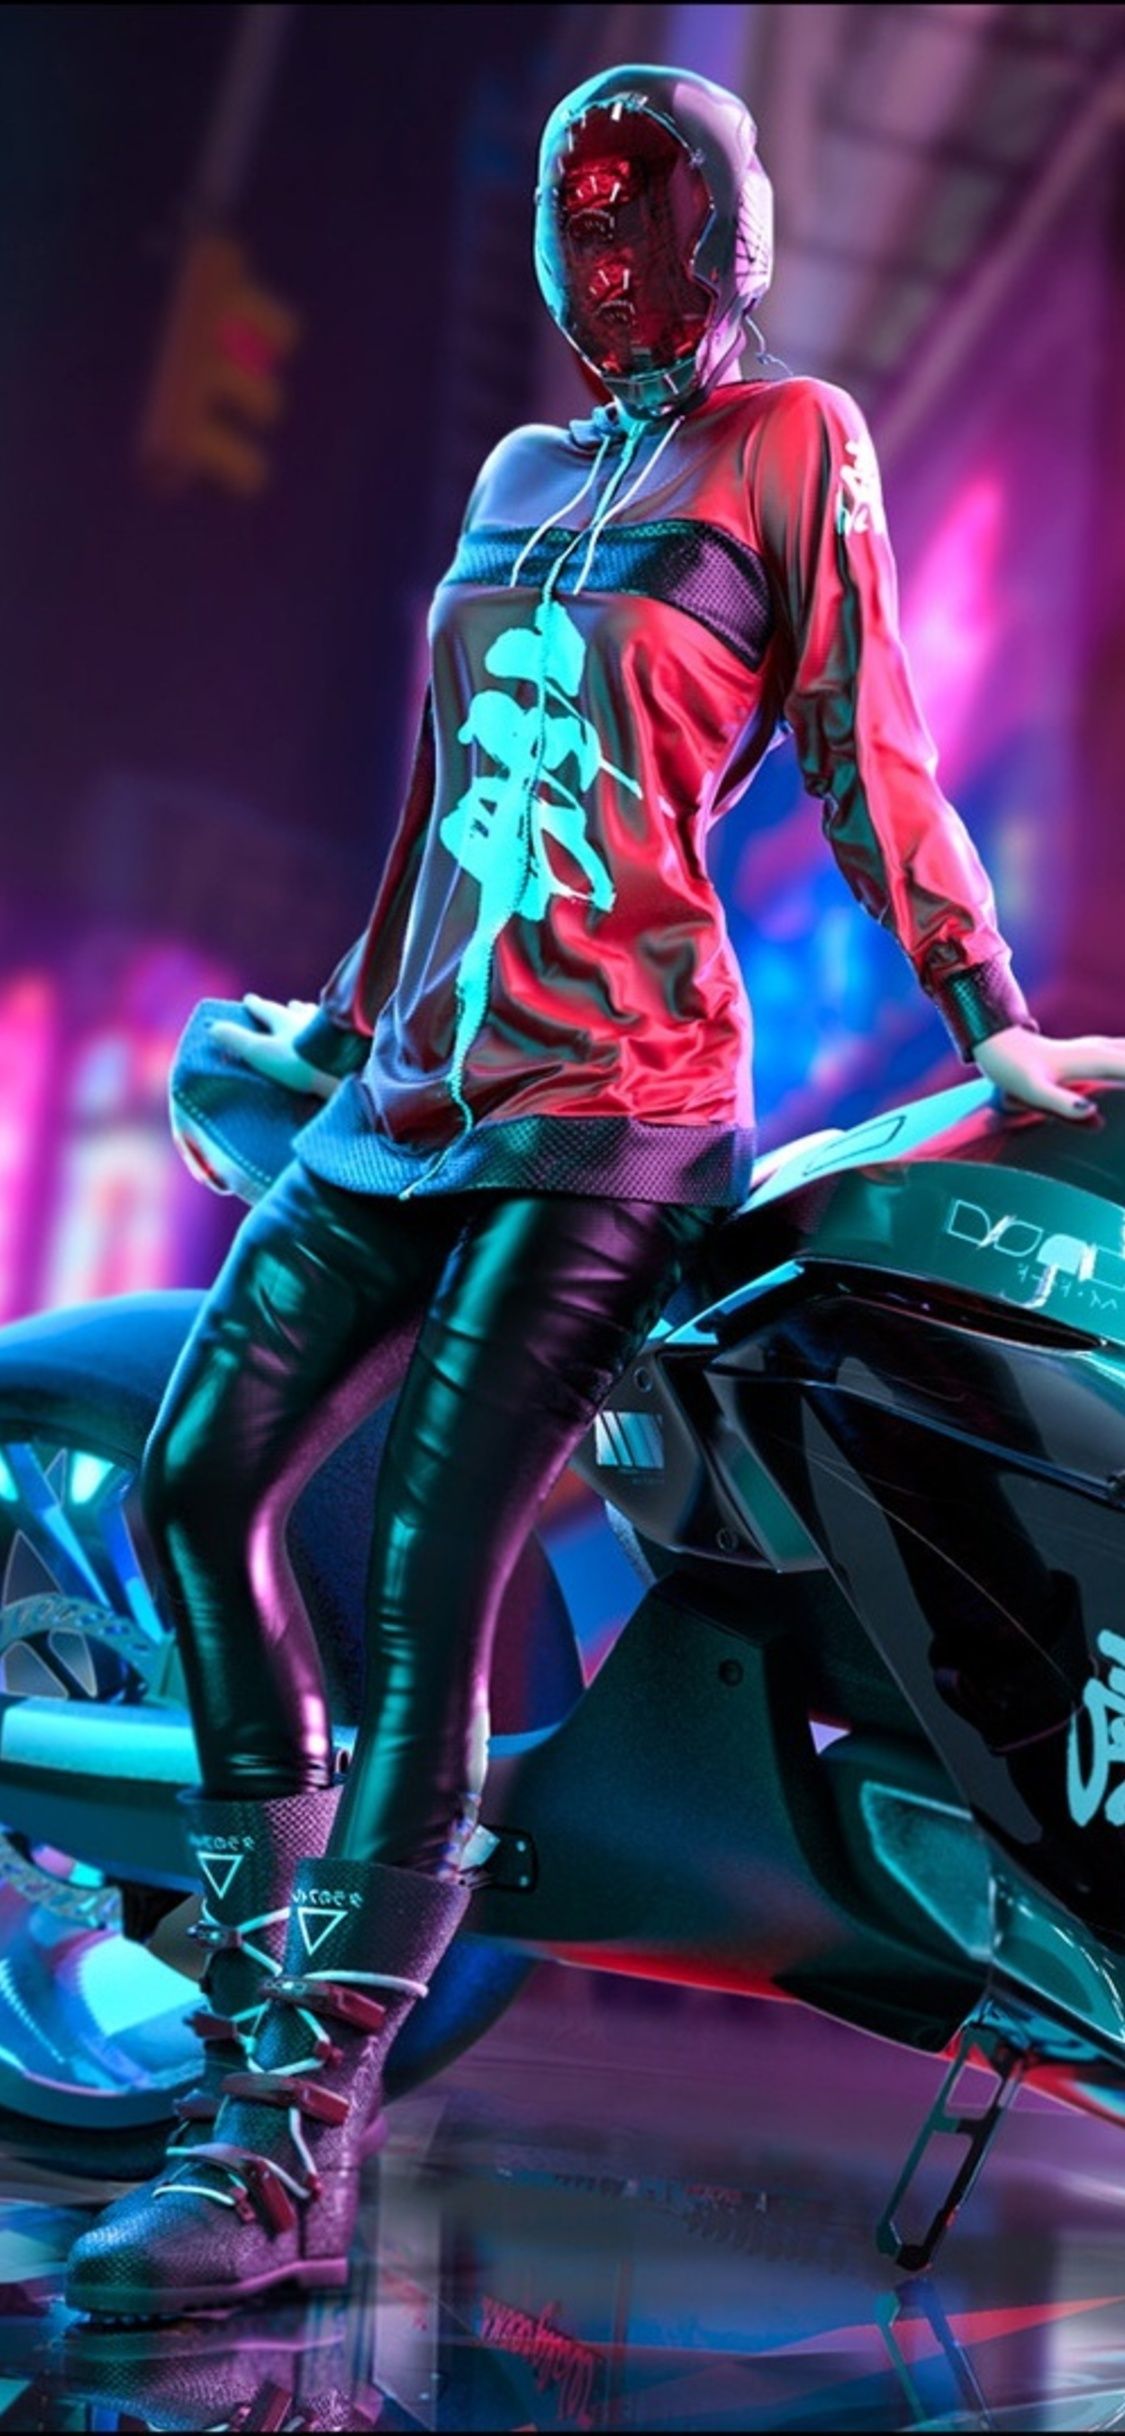 Cyberpunk Scifi Girl With Motorcycle iPhone XS, iPhone 10